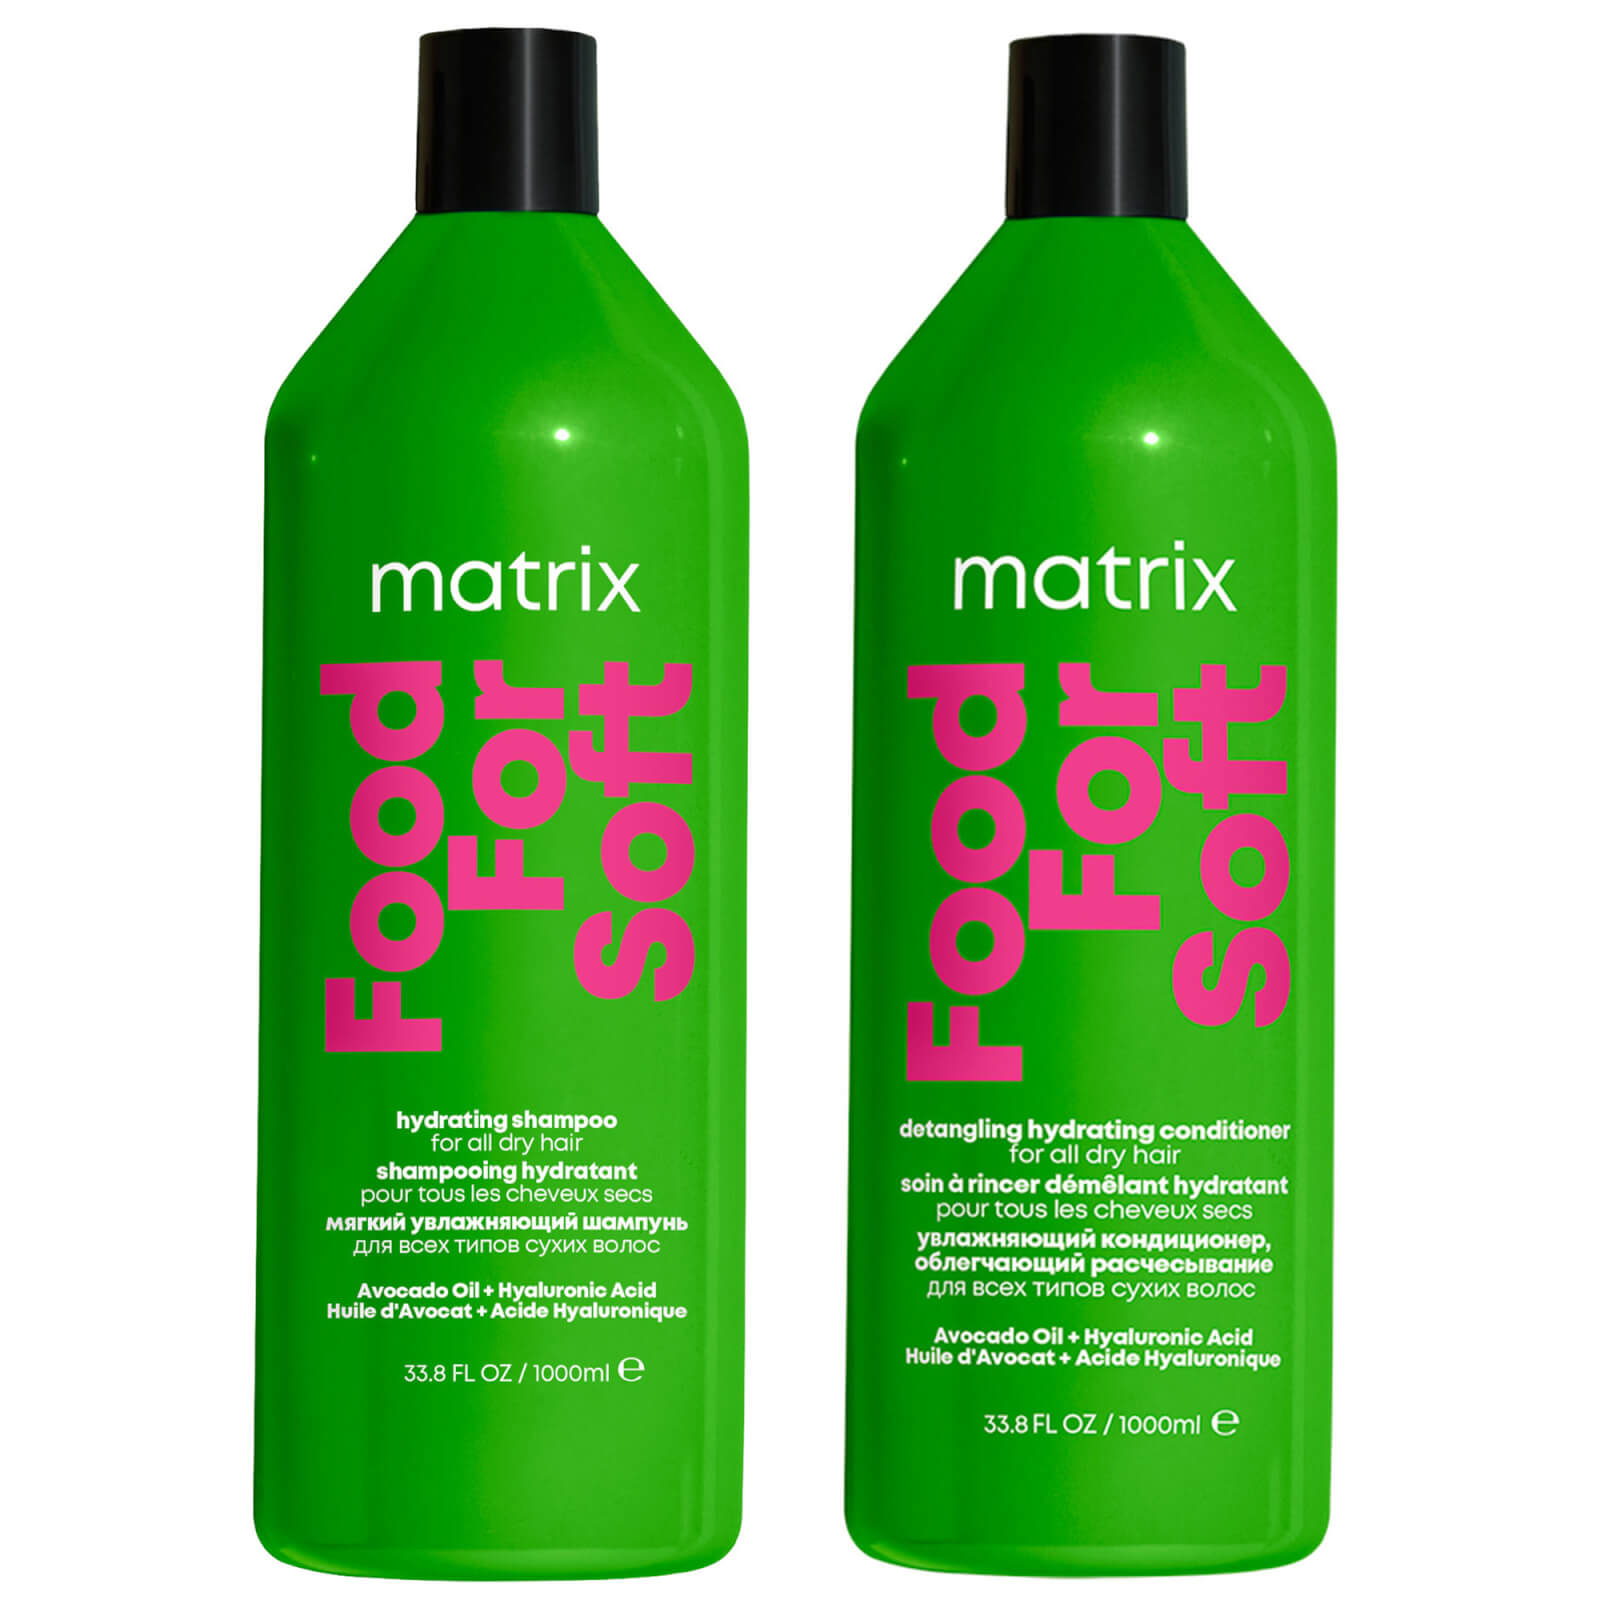 Matrix Food For Soft Hydrating 1000ml Shampoo And Conditioner With Avocado Oil And Hyaluronic Acid For Dry 